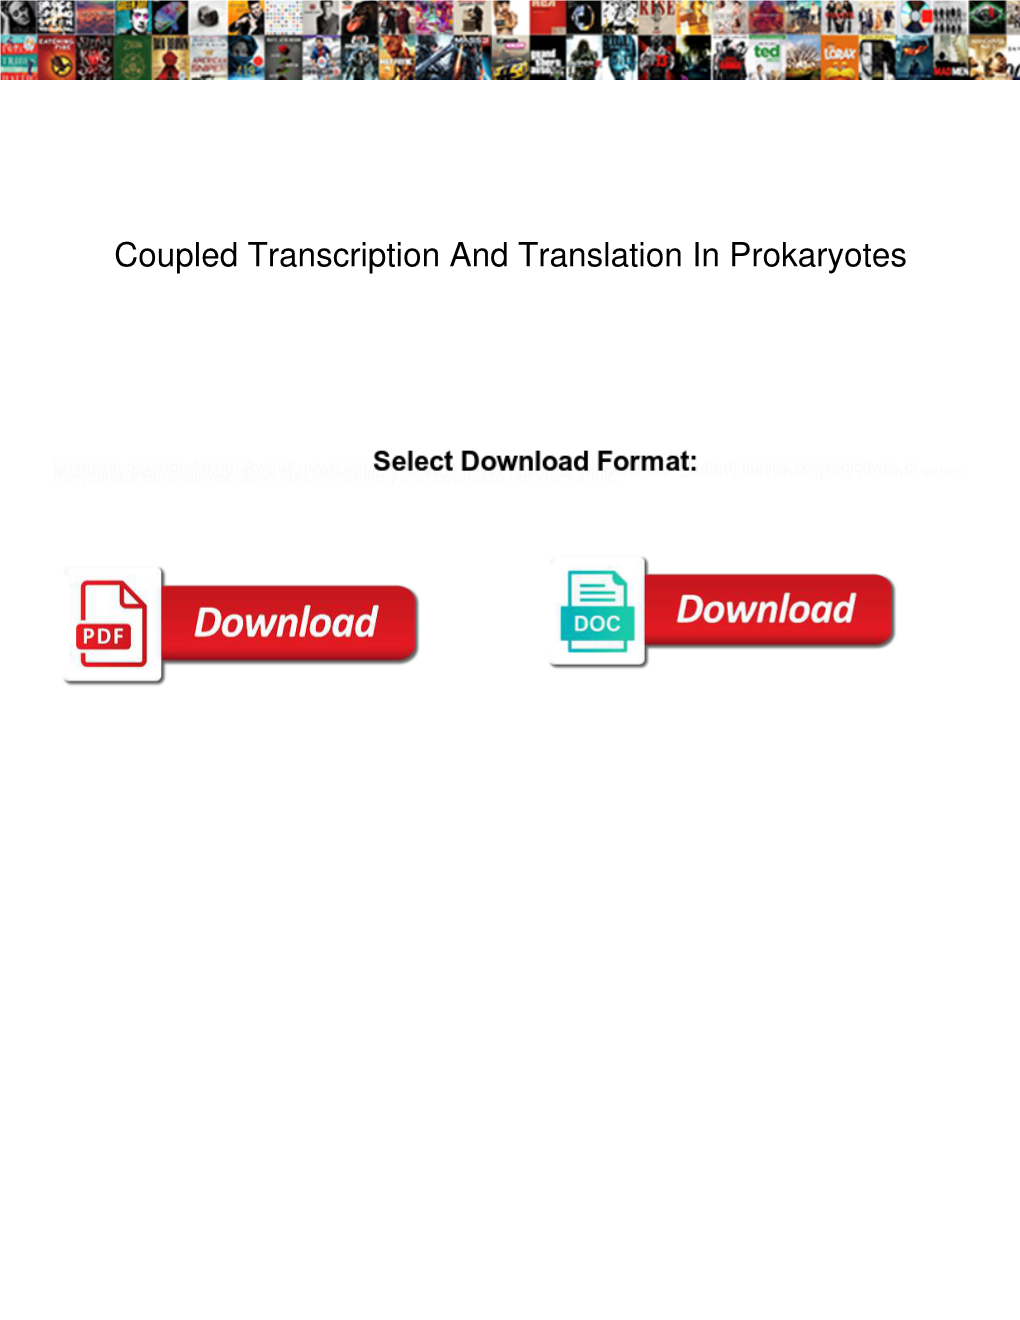 Coupled Transcription and Translation in Prokaryotes